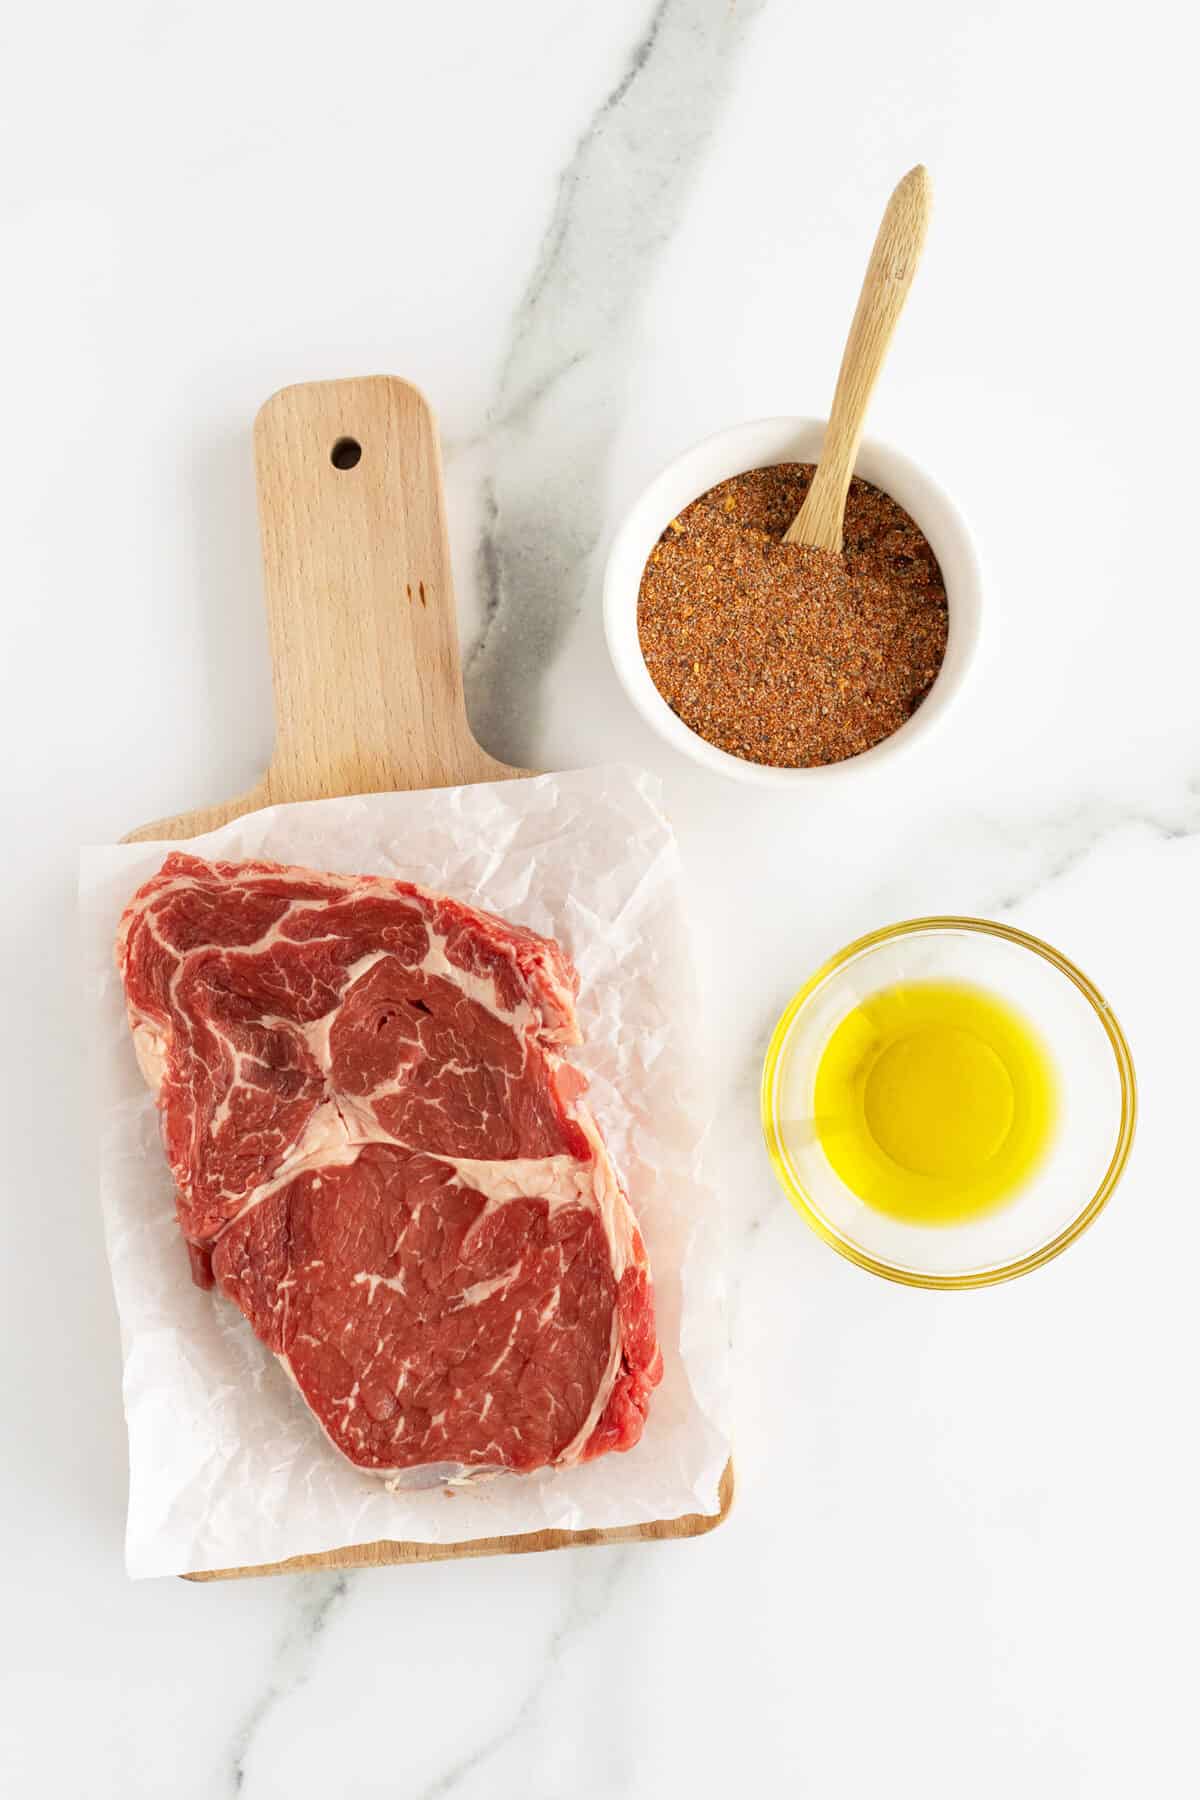 air fryer steak ingredients  in small bowls and the steak on parchment paper